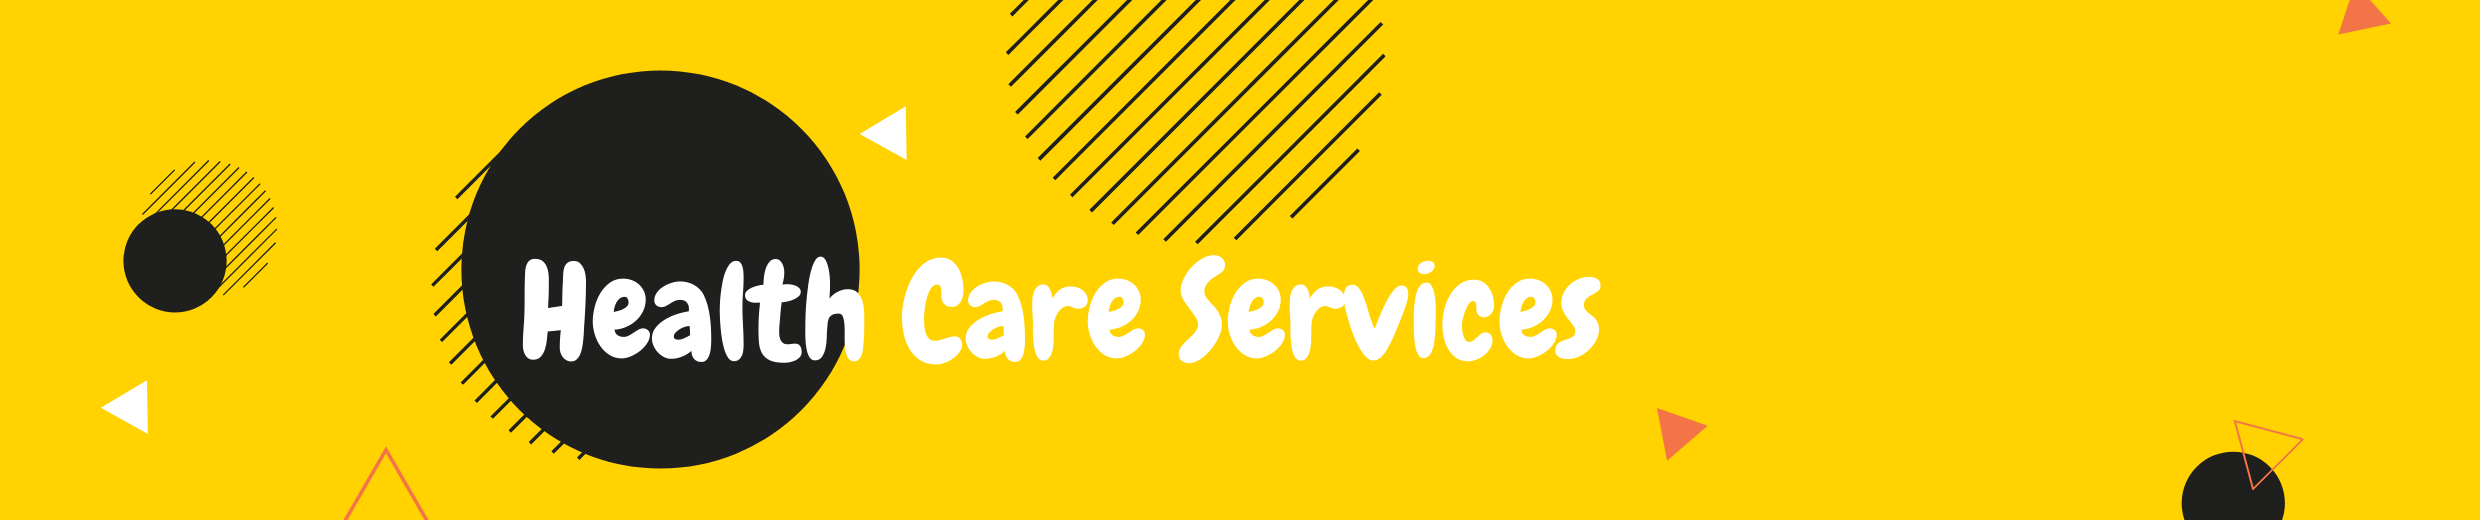 Health Care Services banner